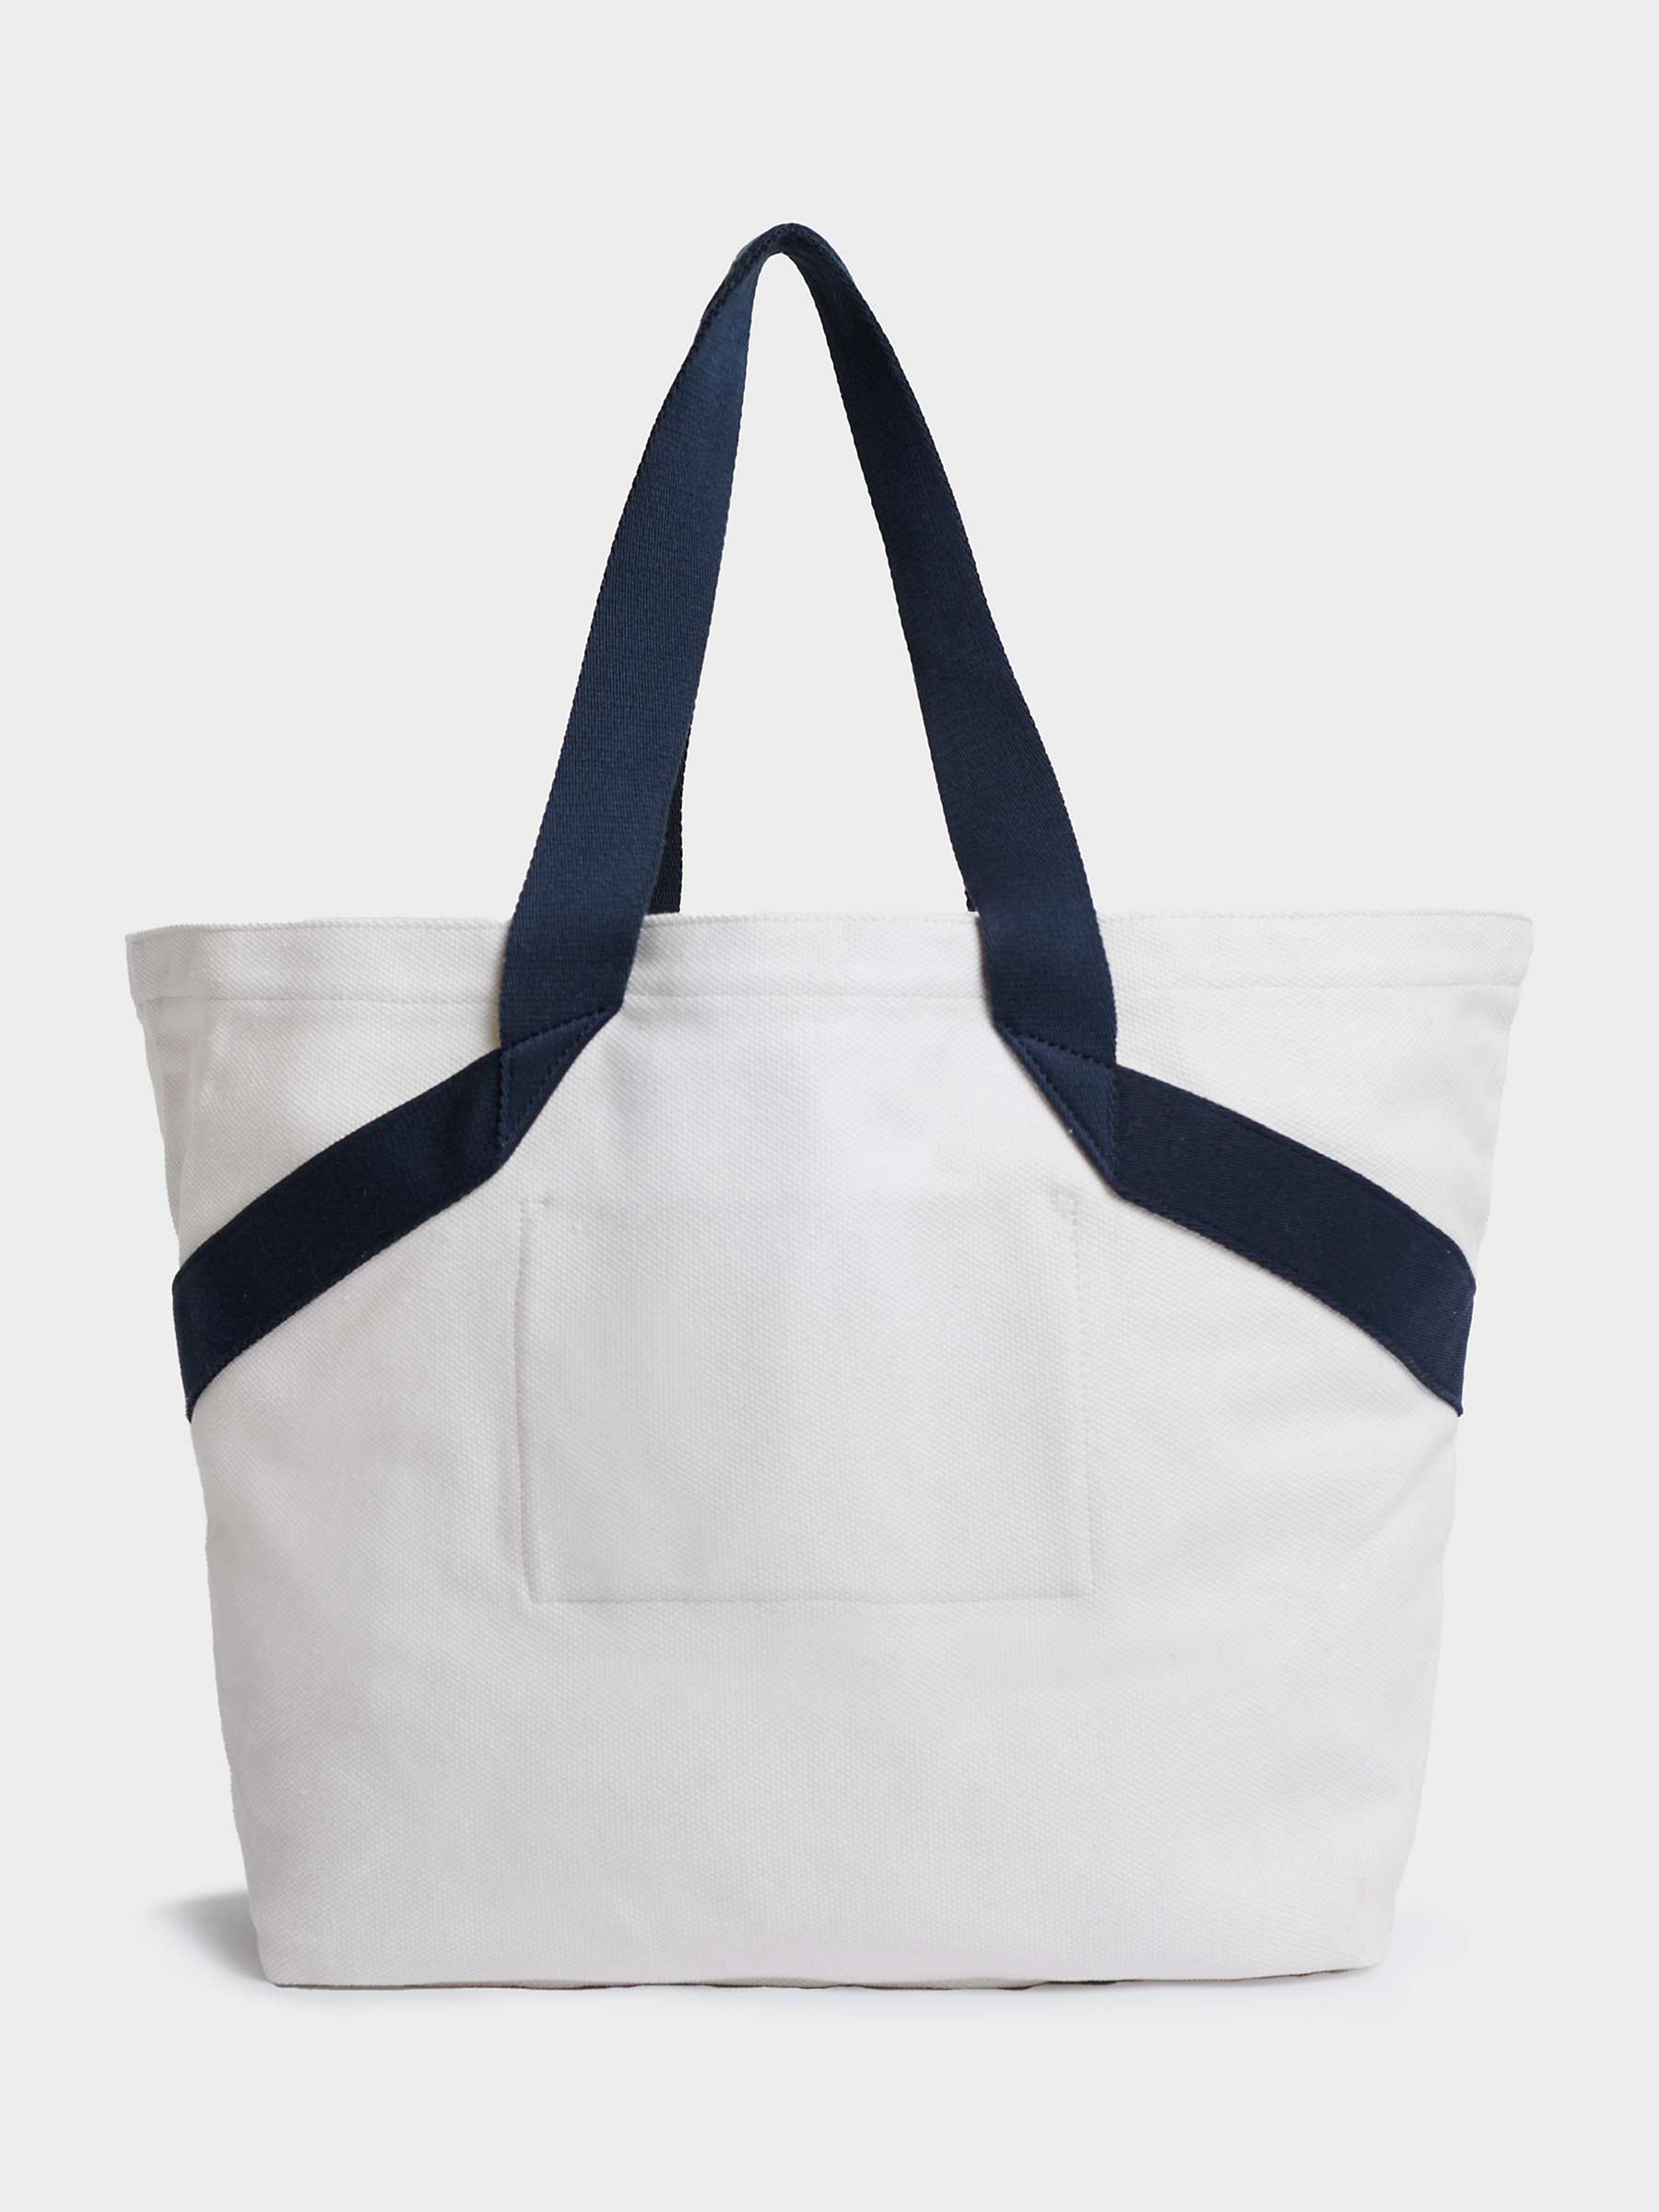 Buy Sweaty Betty Essentials Canvas Tote Bag, Lily White Online at johnlewis.com